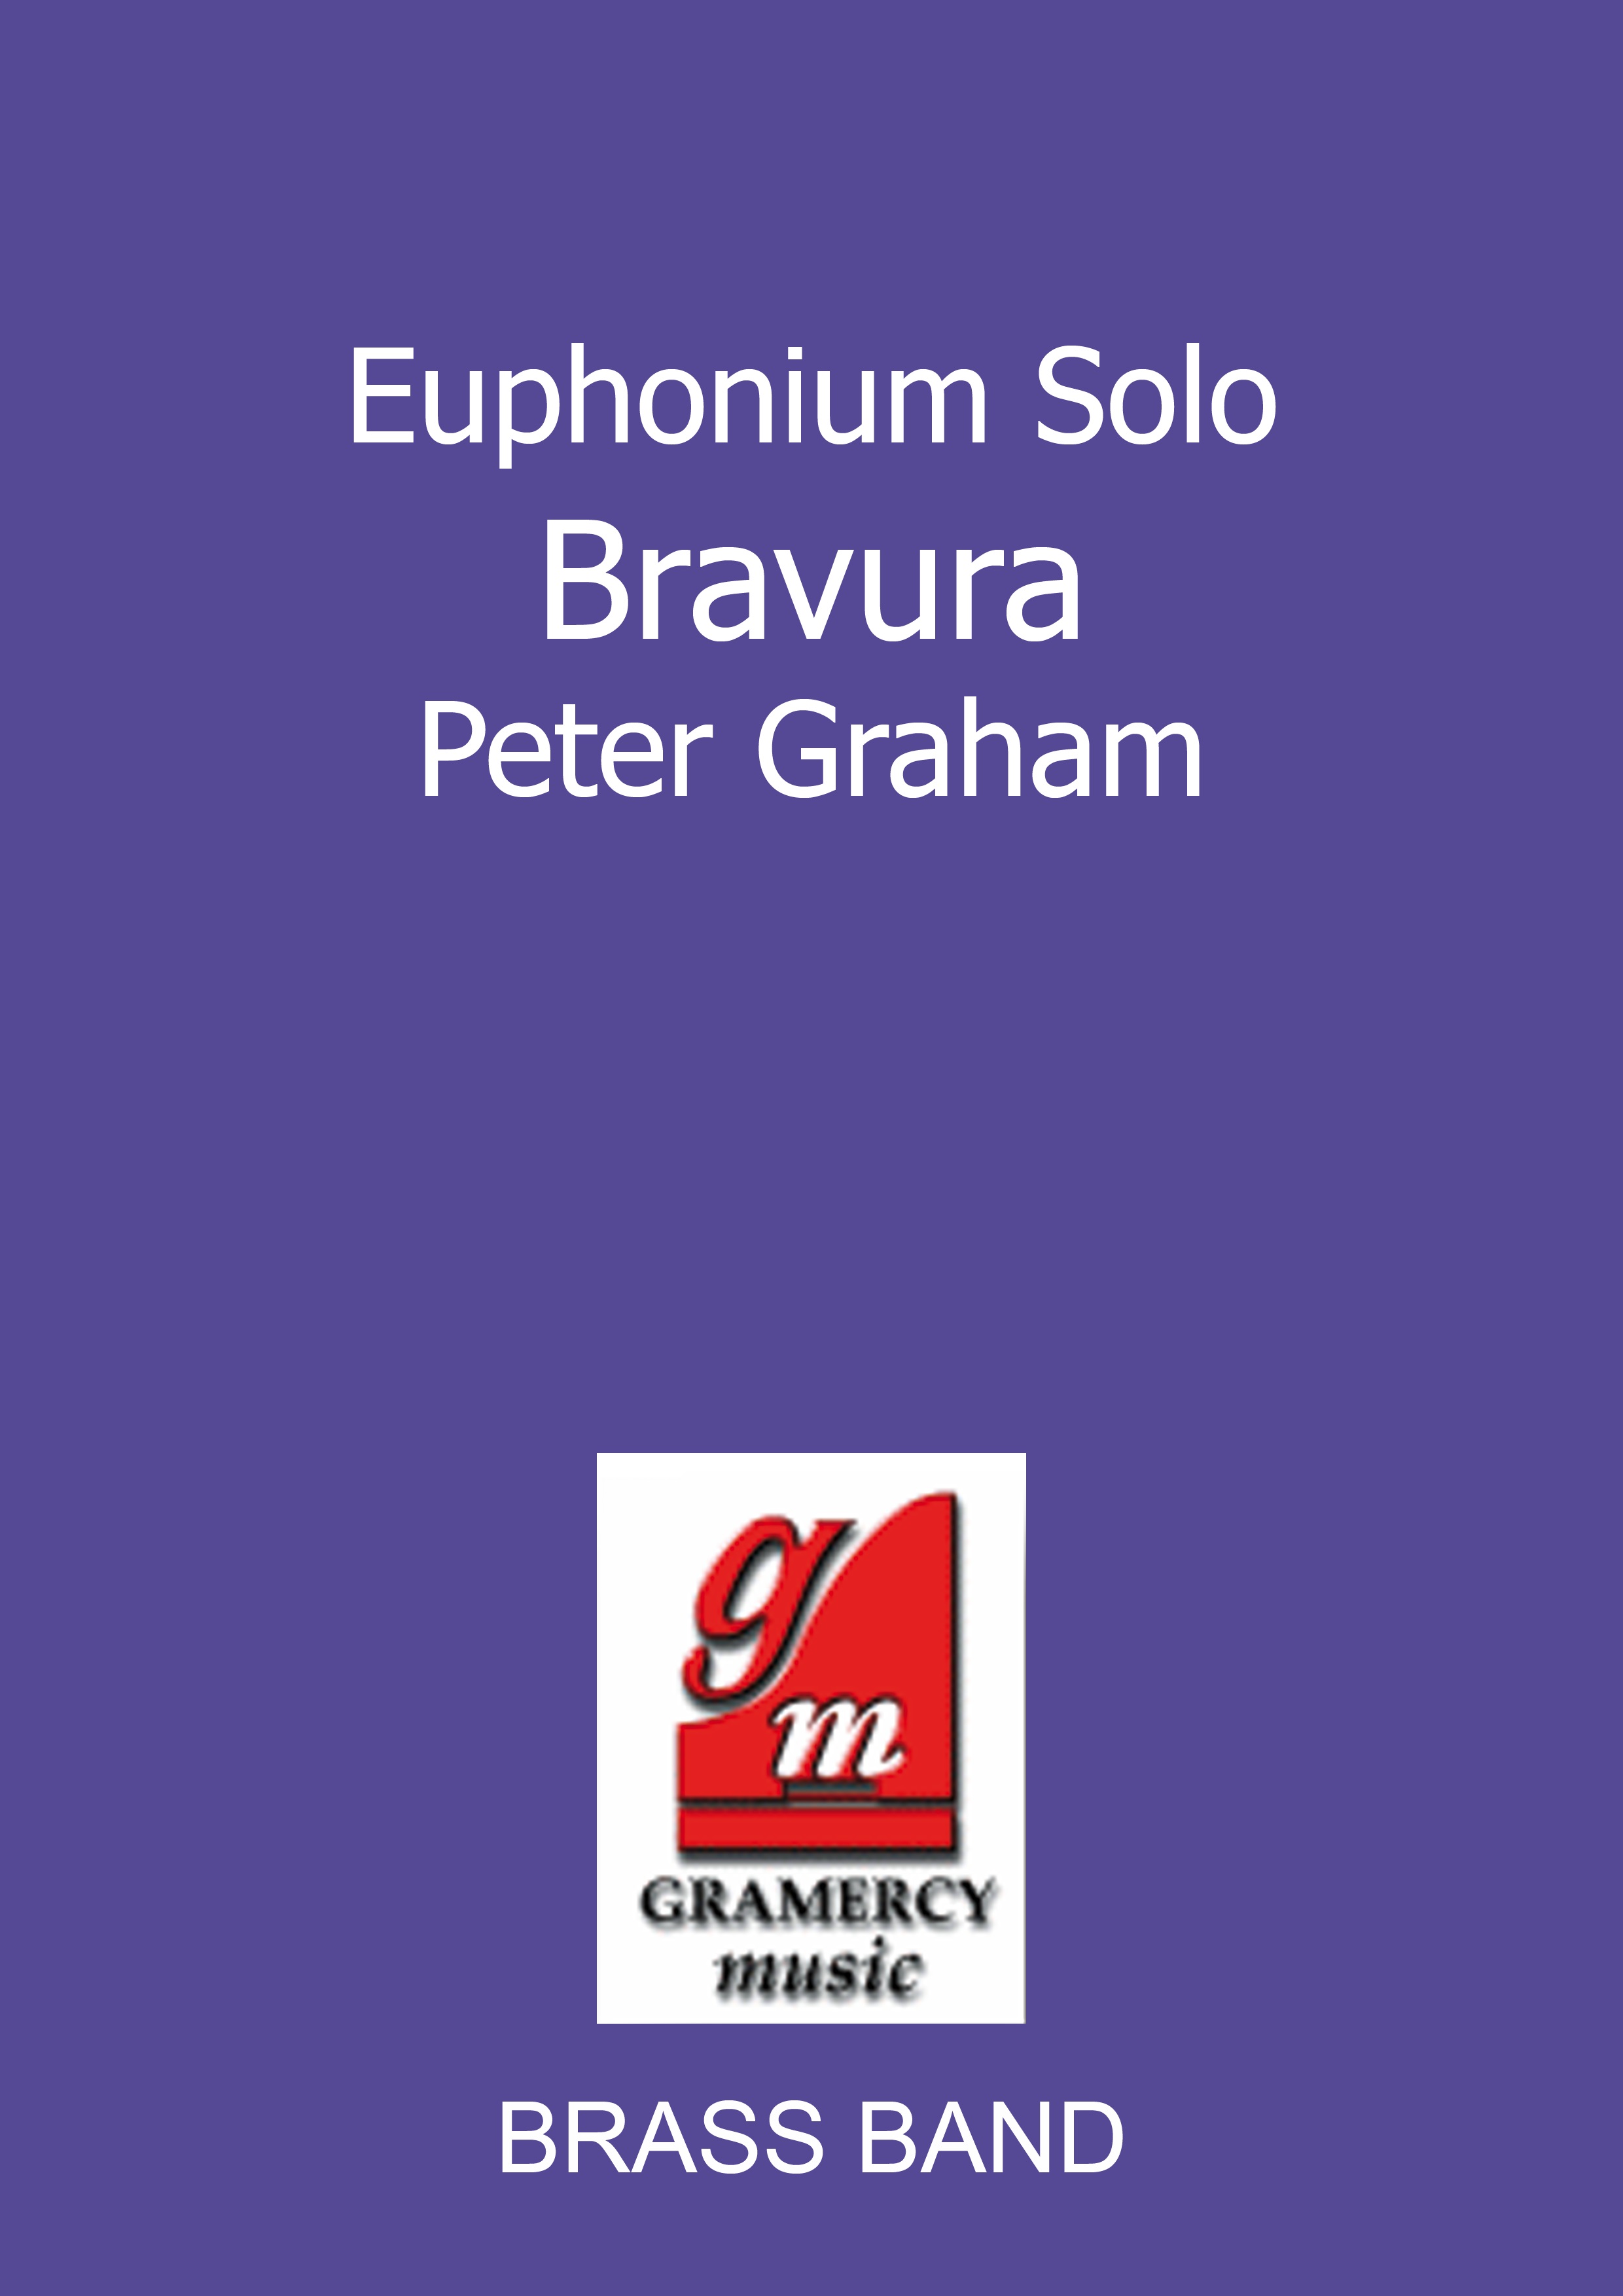 Bravura (A Fantasy on British Folk Songs) (Euphonium Solo with Brass Band)